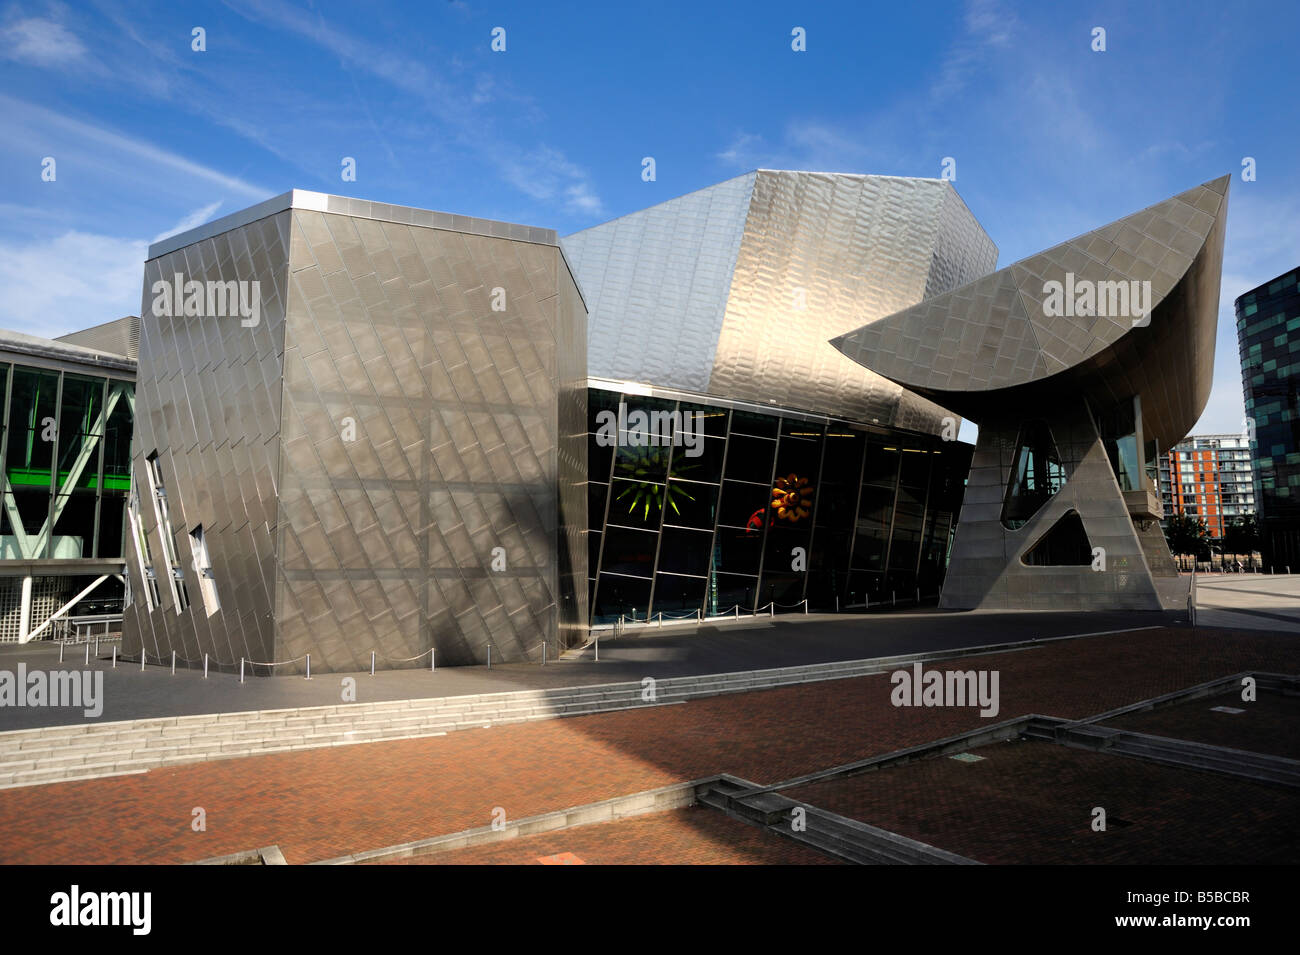 Il Lowry Centre, Salford Quays, Greater Manchester, Inghilterra, Europa Foto Stock